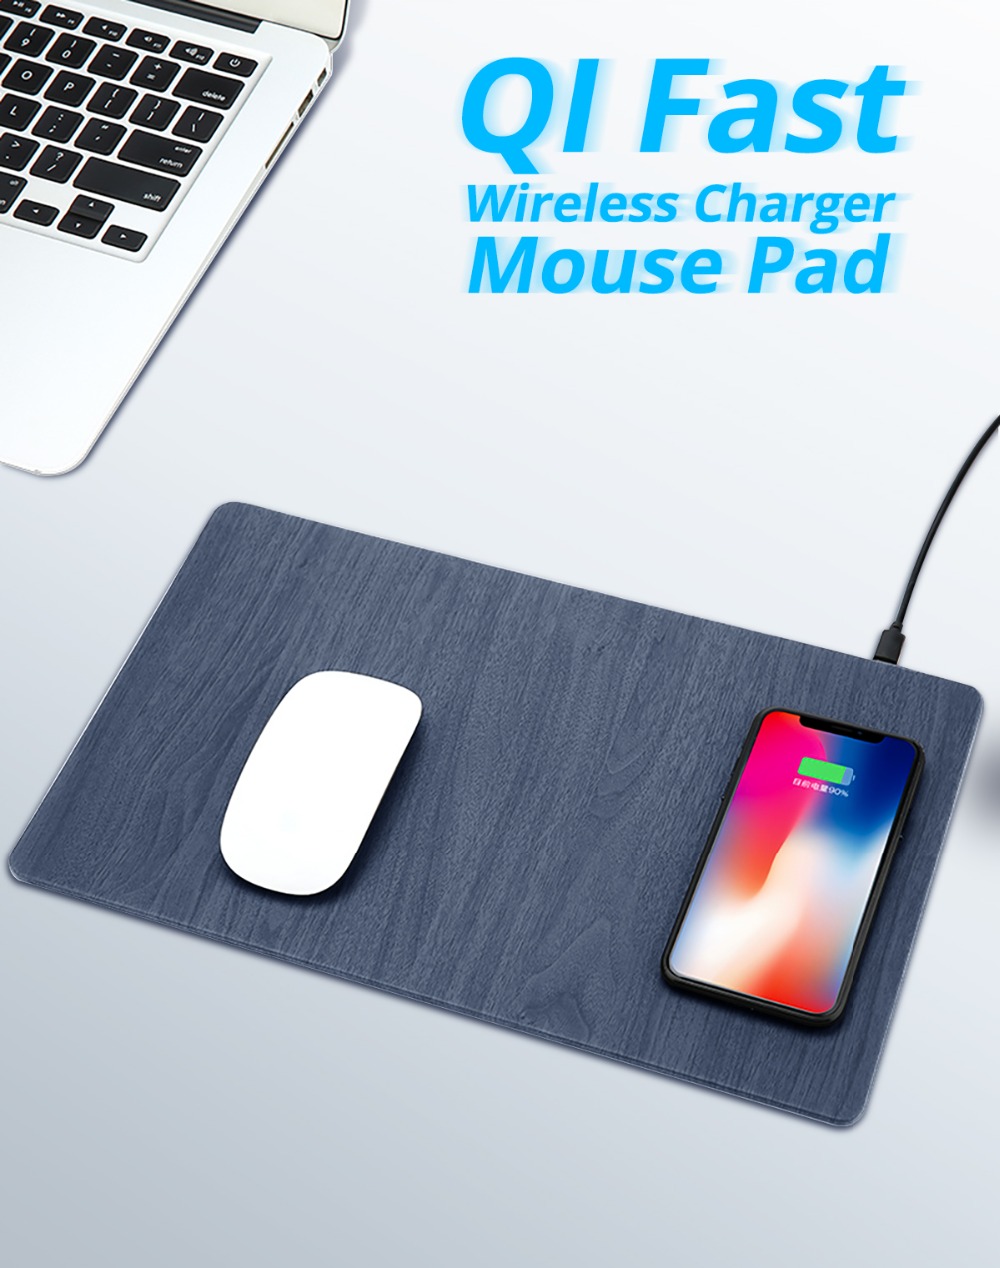 FONKEN-Mouse-PU-Wood-Grain-Quick-Charge-Pad-Qi-5W-10W-USB-Wireless-Charger-for-Phone-Charging-Pad-De-1524024-1